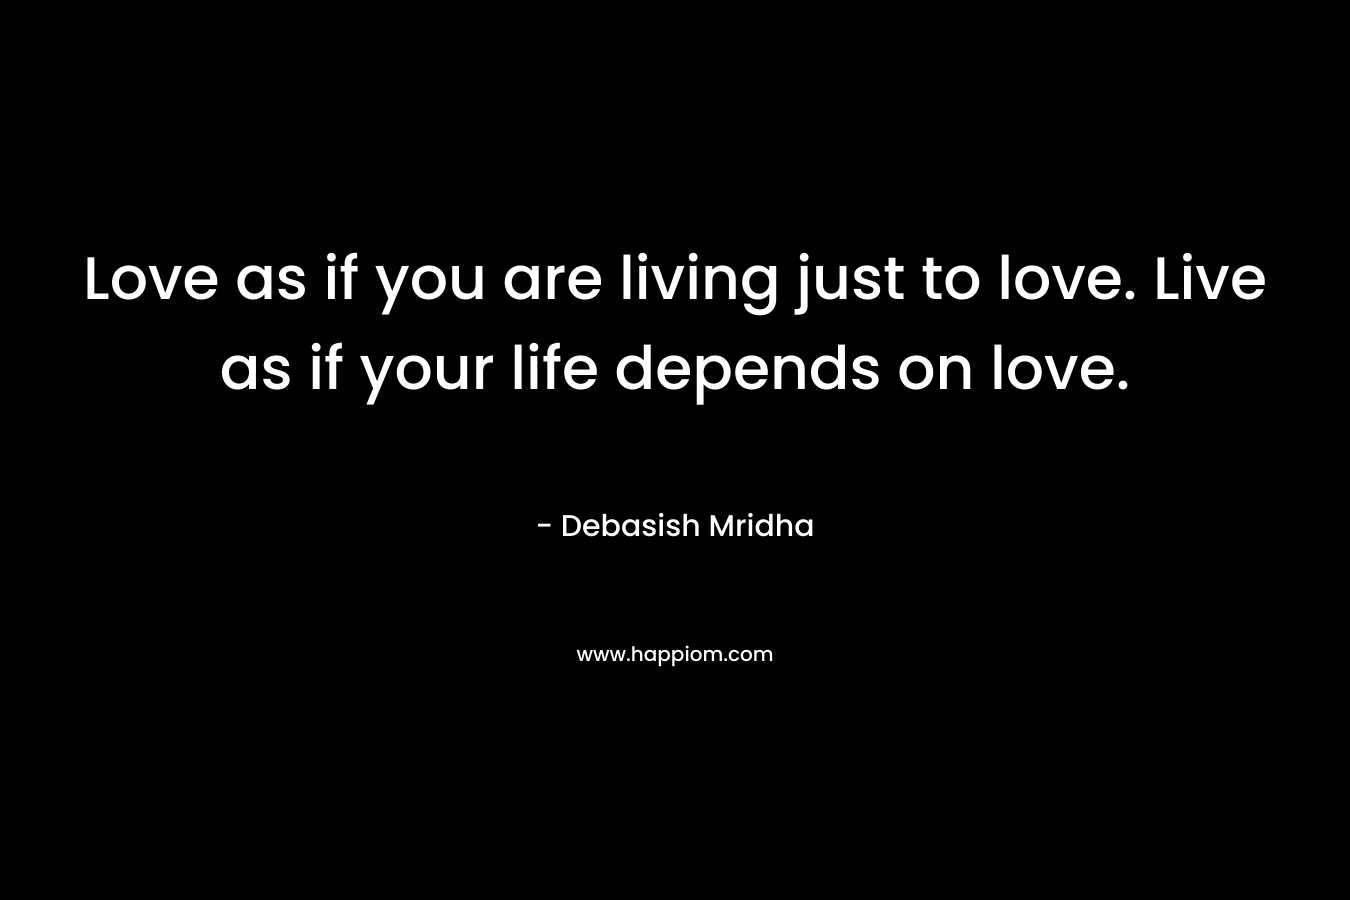 Love as if you are living just to love. Live as if your life depends on love.